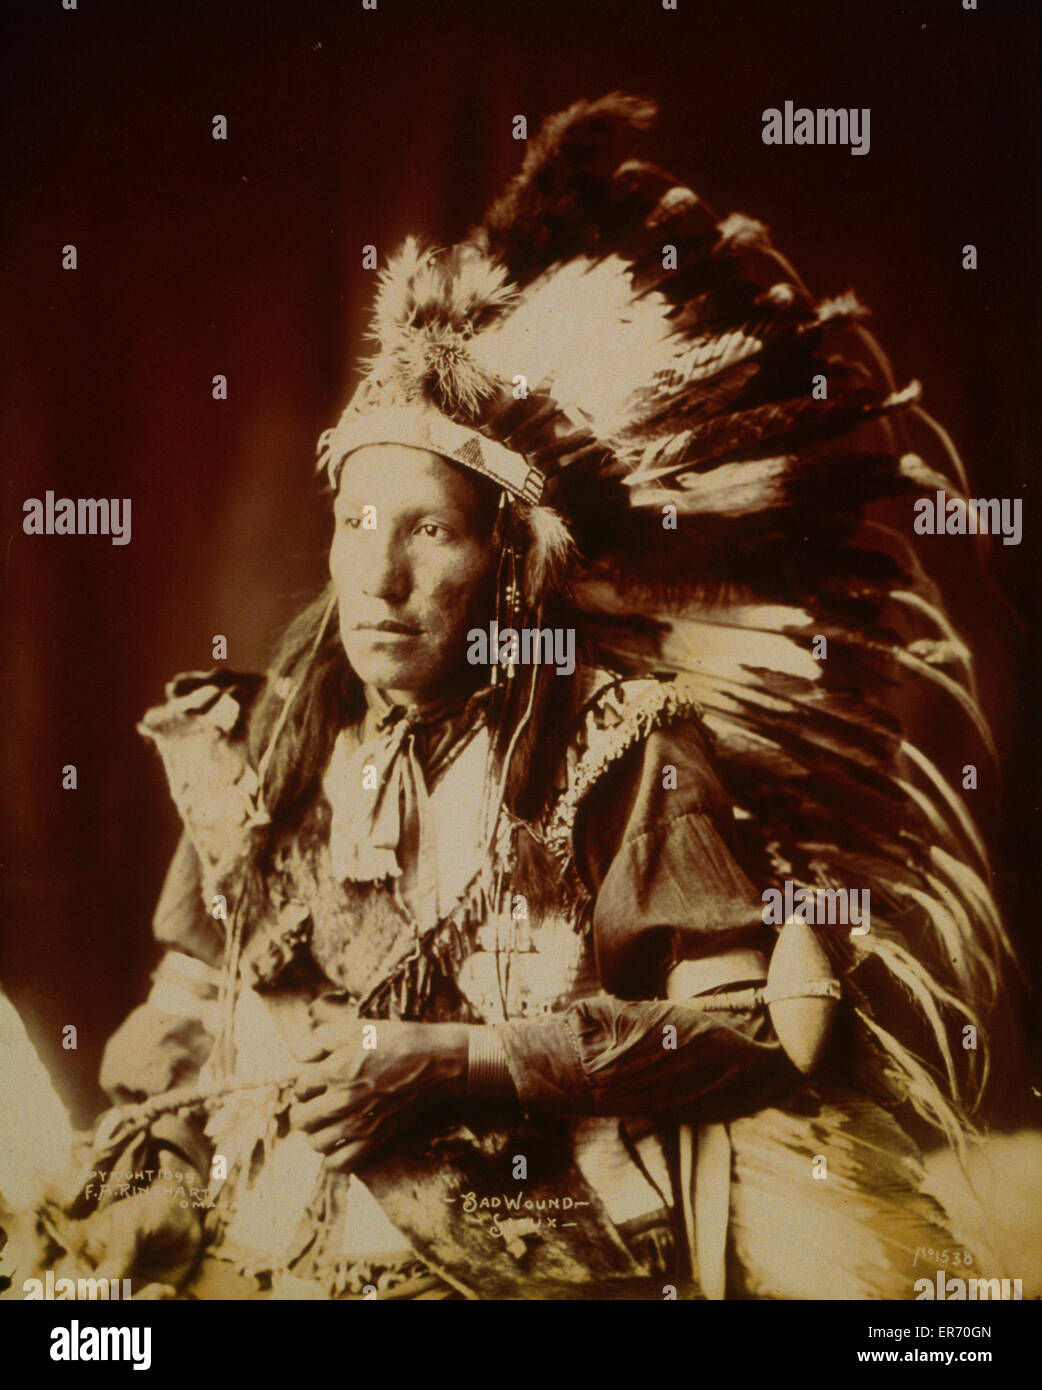 Bad Wound - Sioux, American Indian Stock Photo